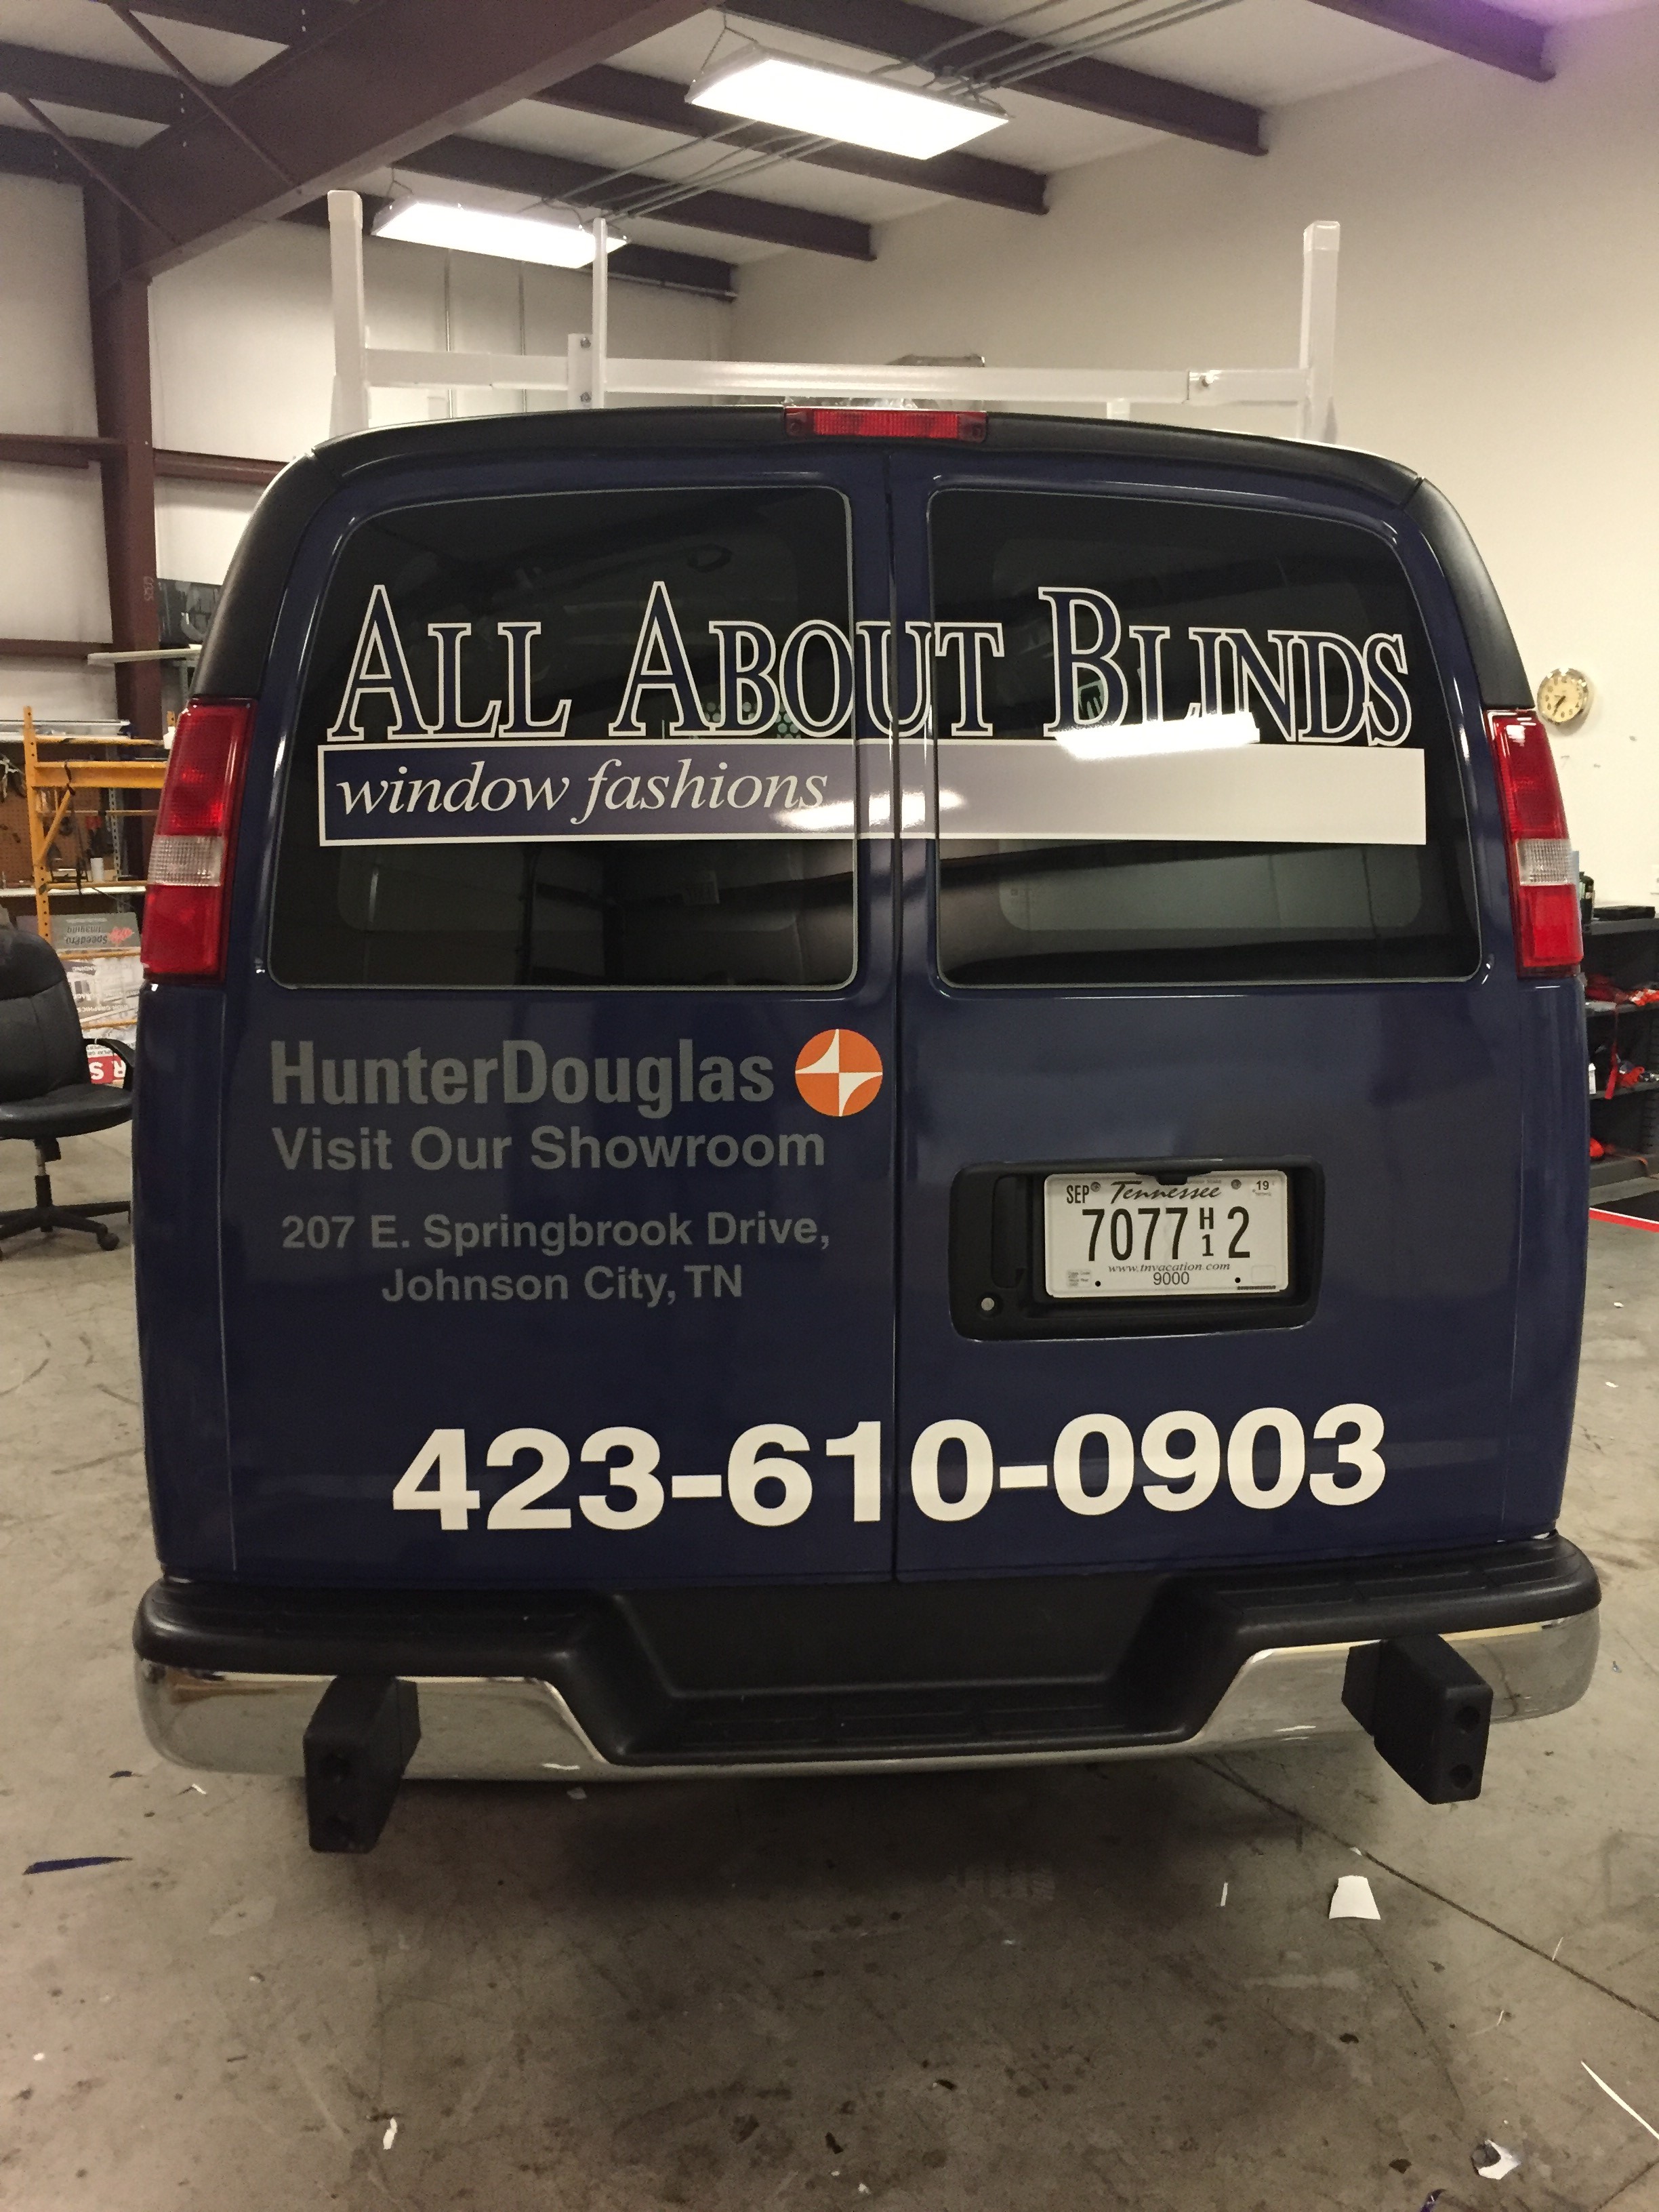 All About Blinds van window decals